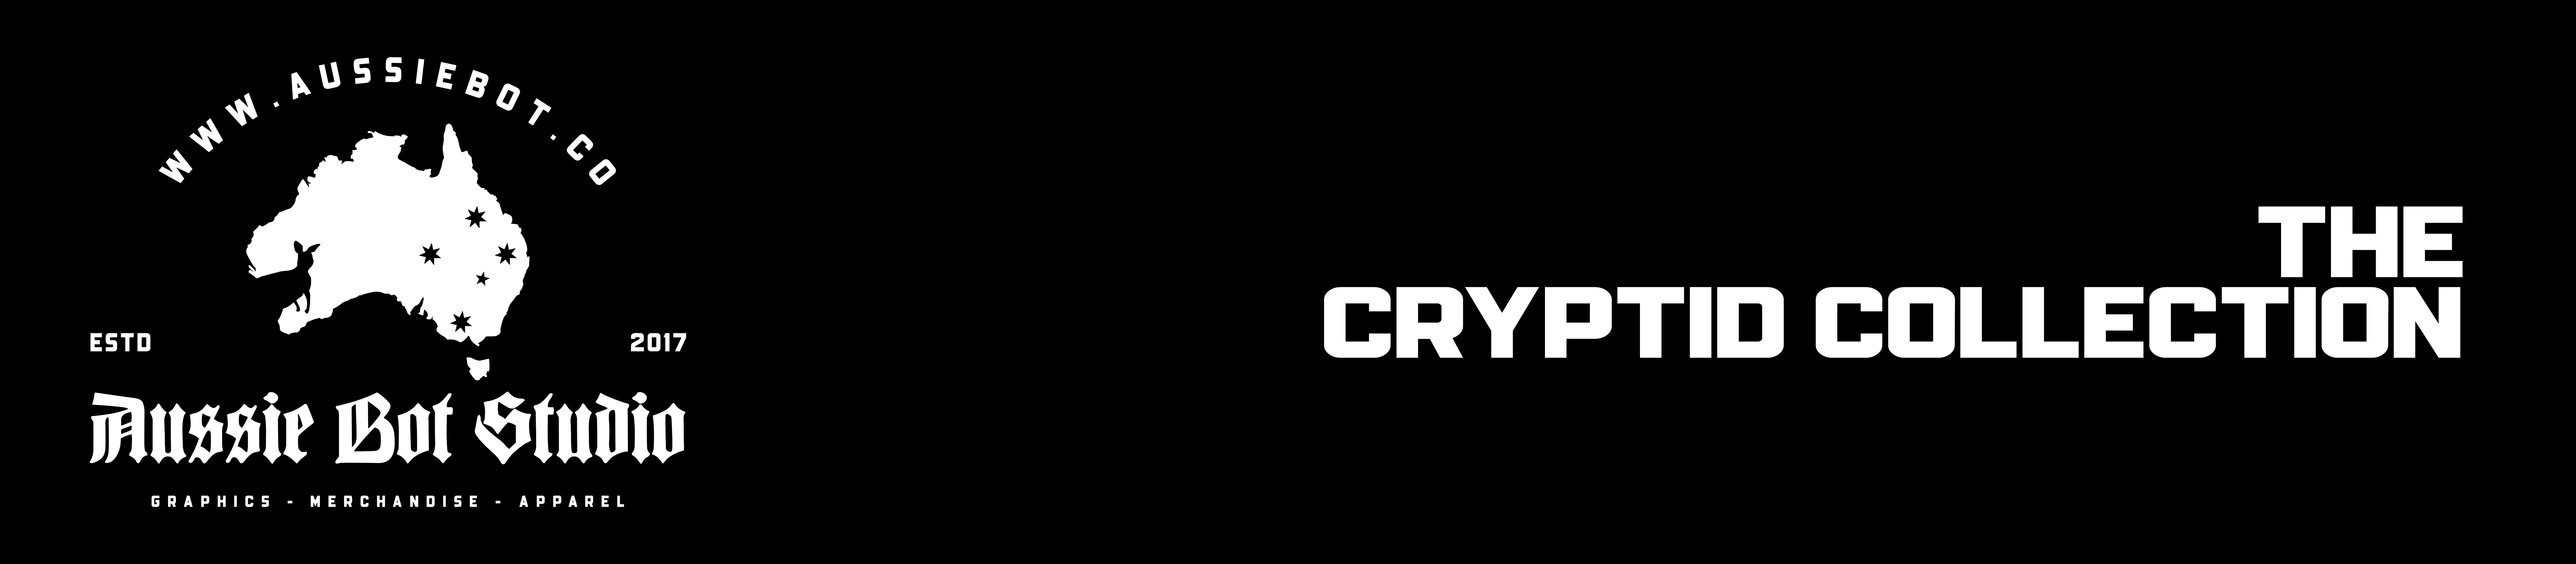 Aussie Bot Studio Presents The Cryptid Collection